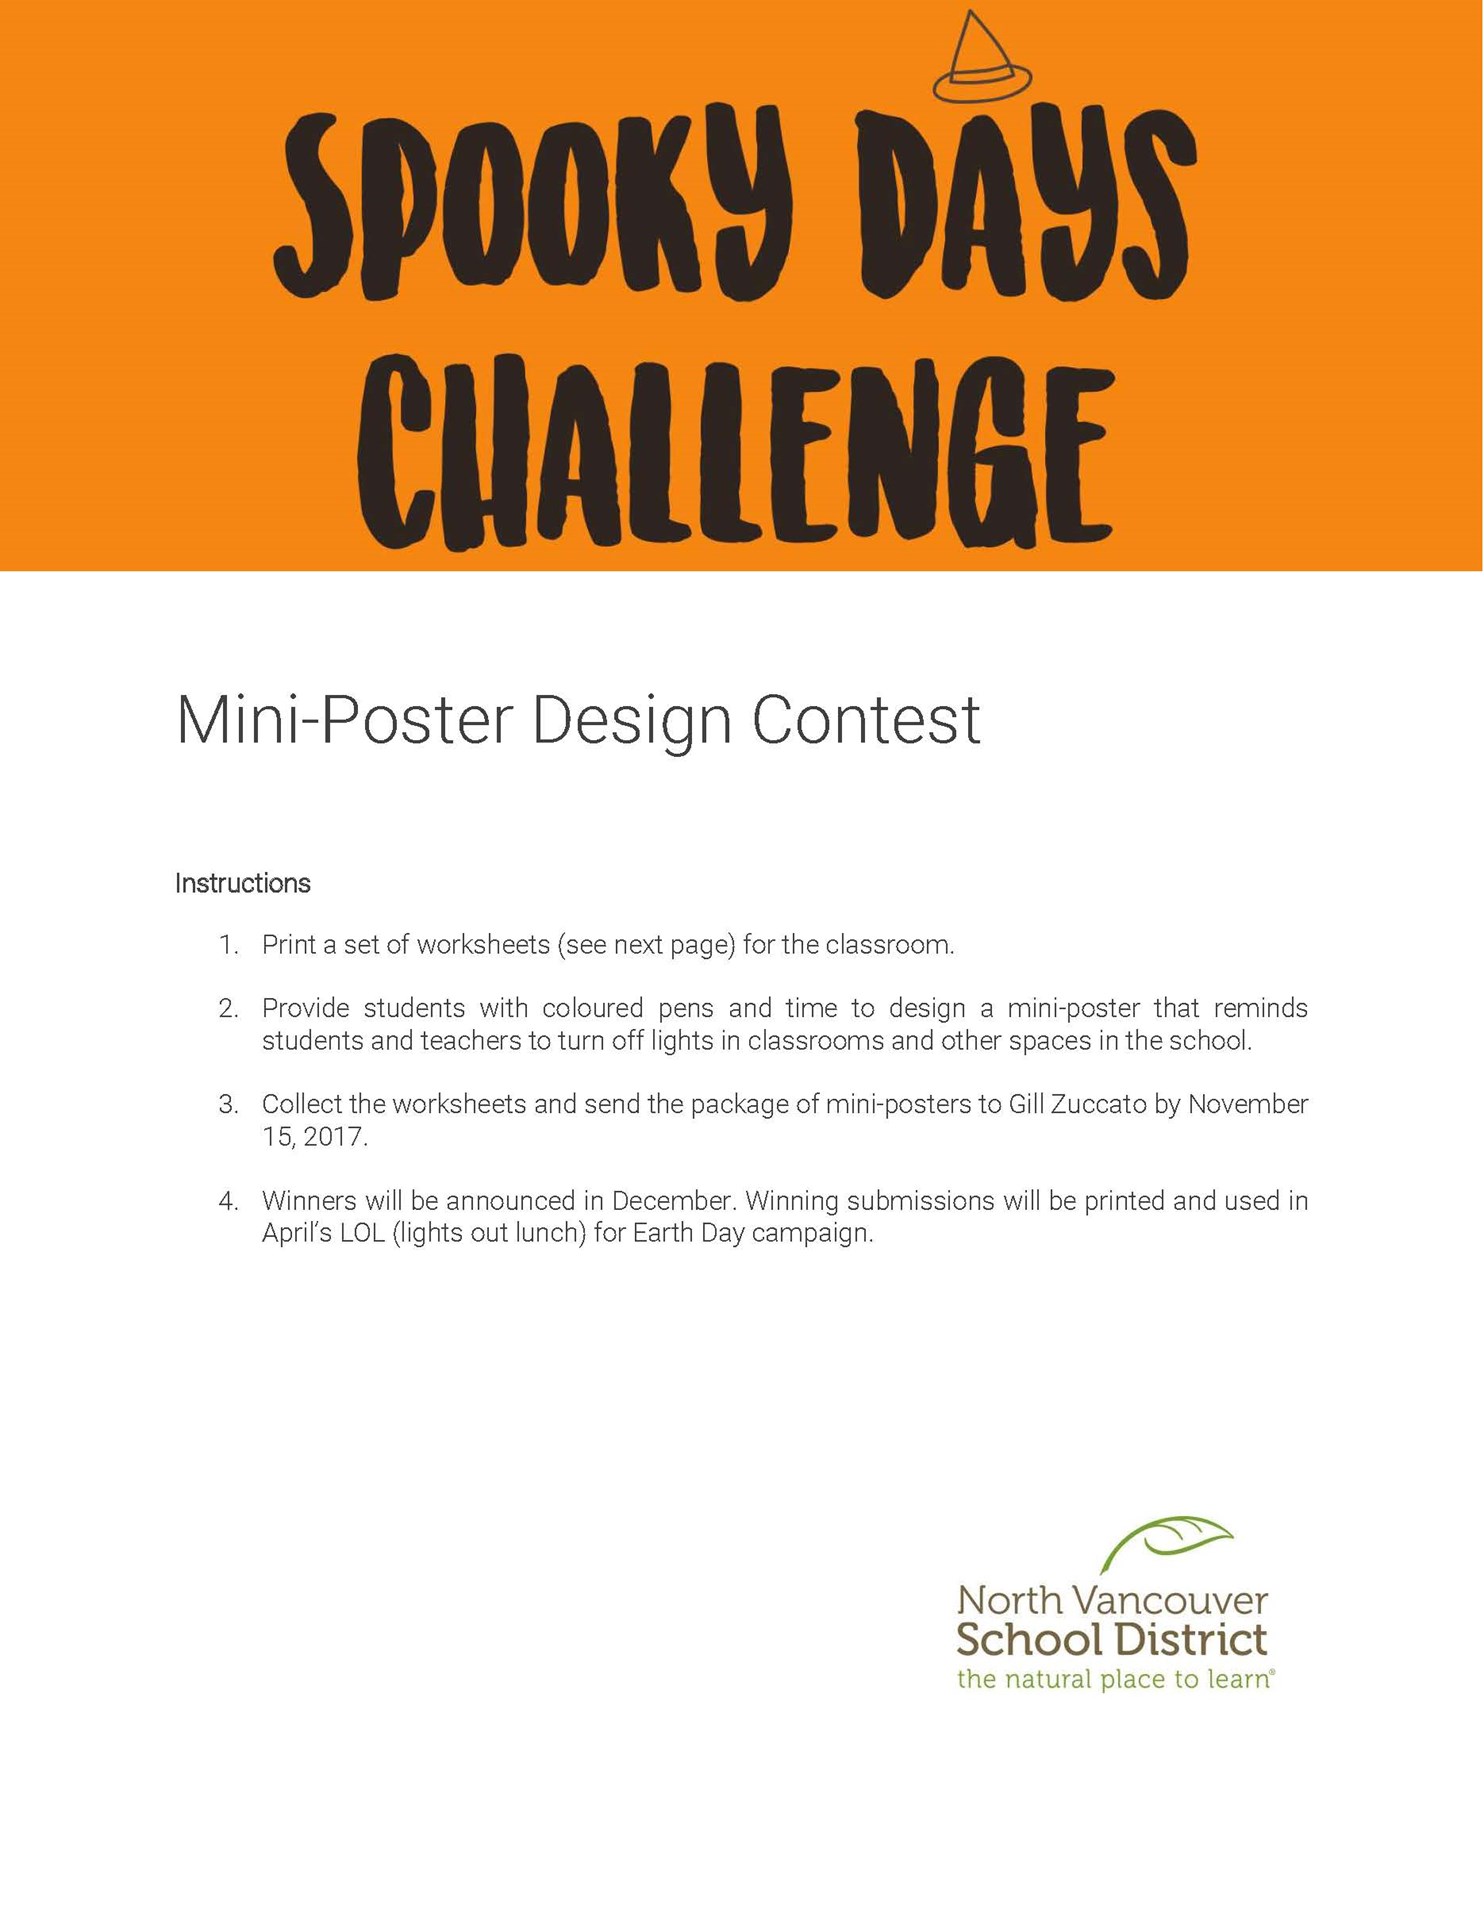 Spooky Days Poster Design Contest_Page_1.jpg